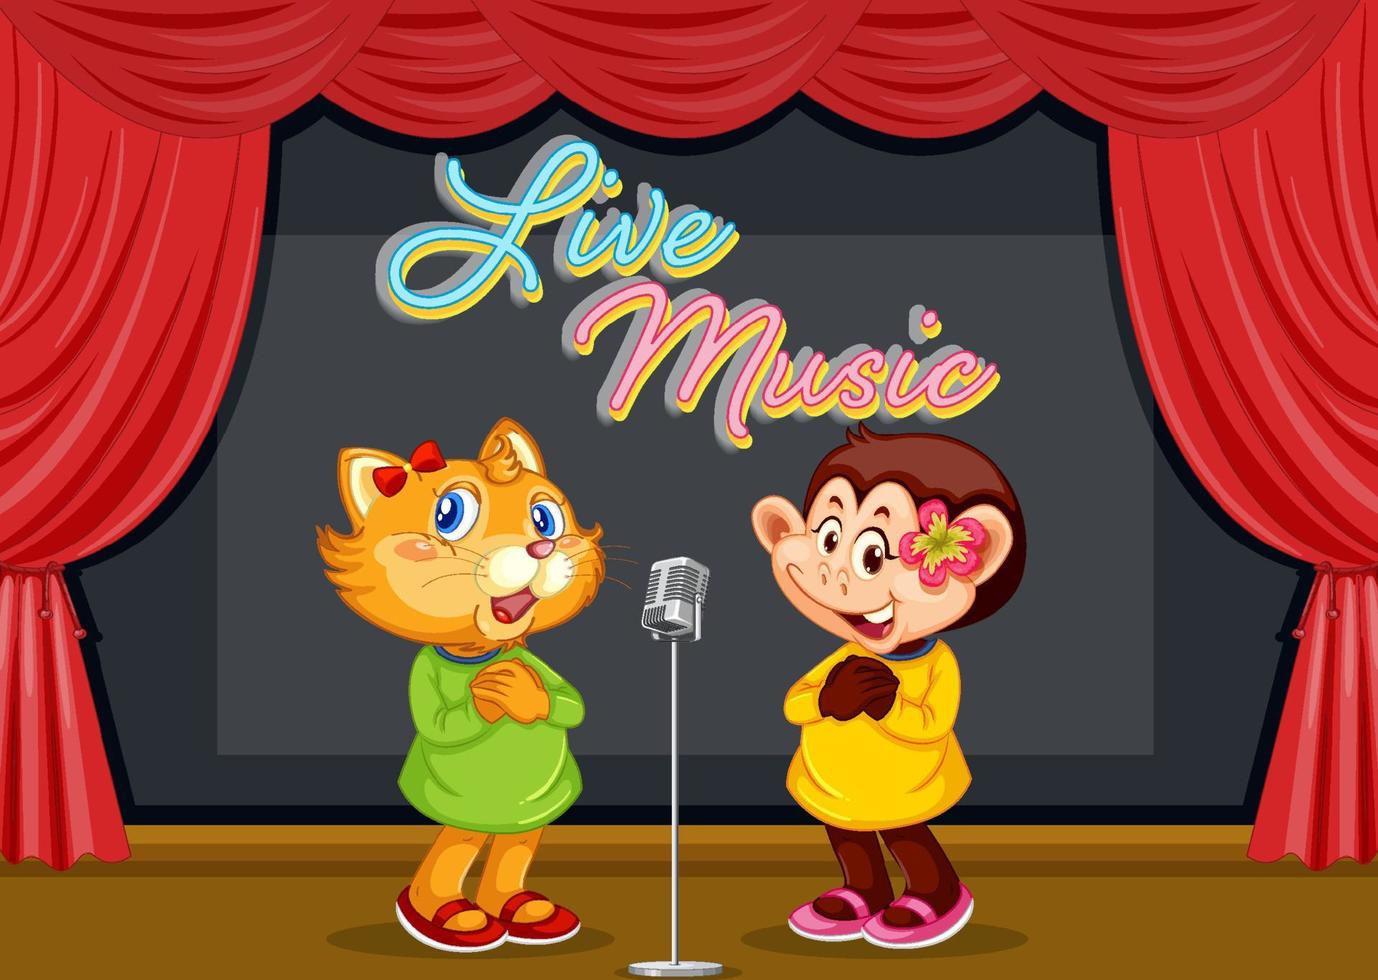 Cat and monkey performing singing on stage vector